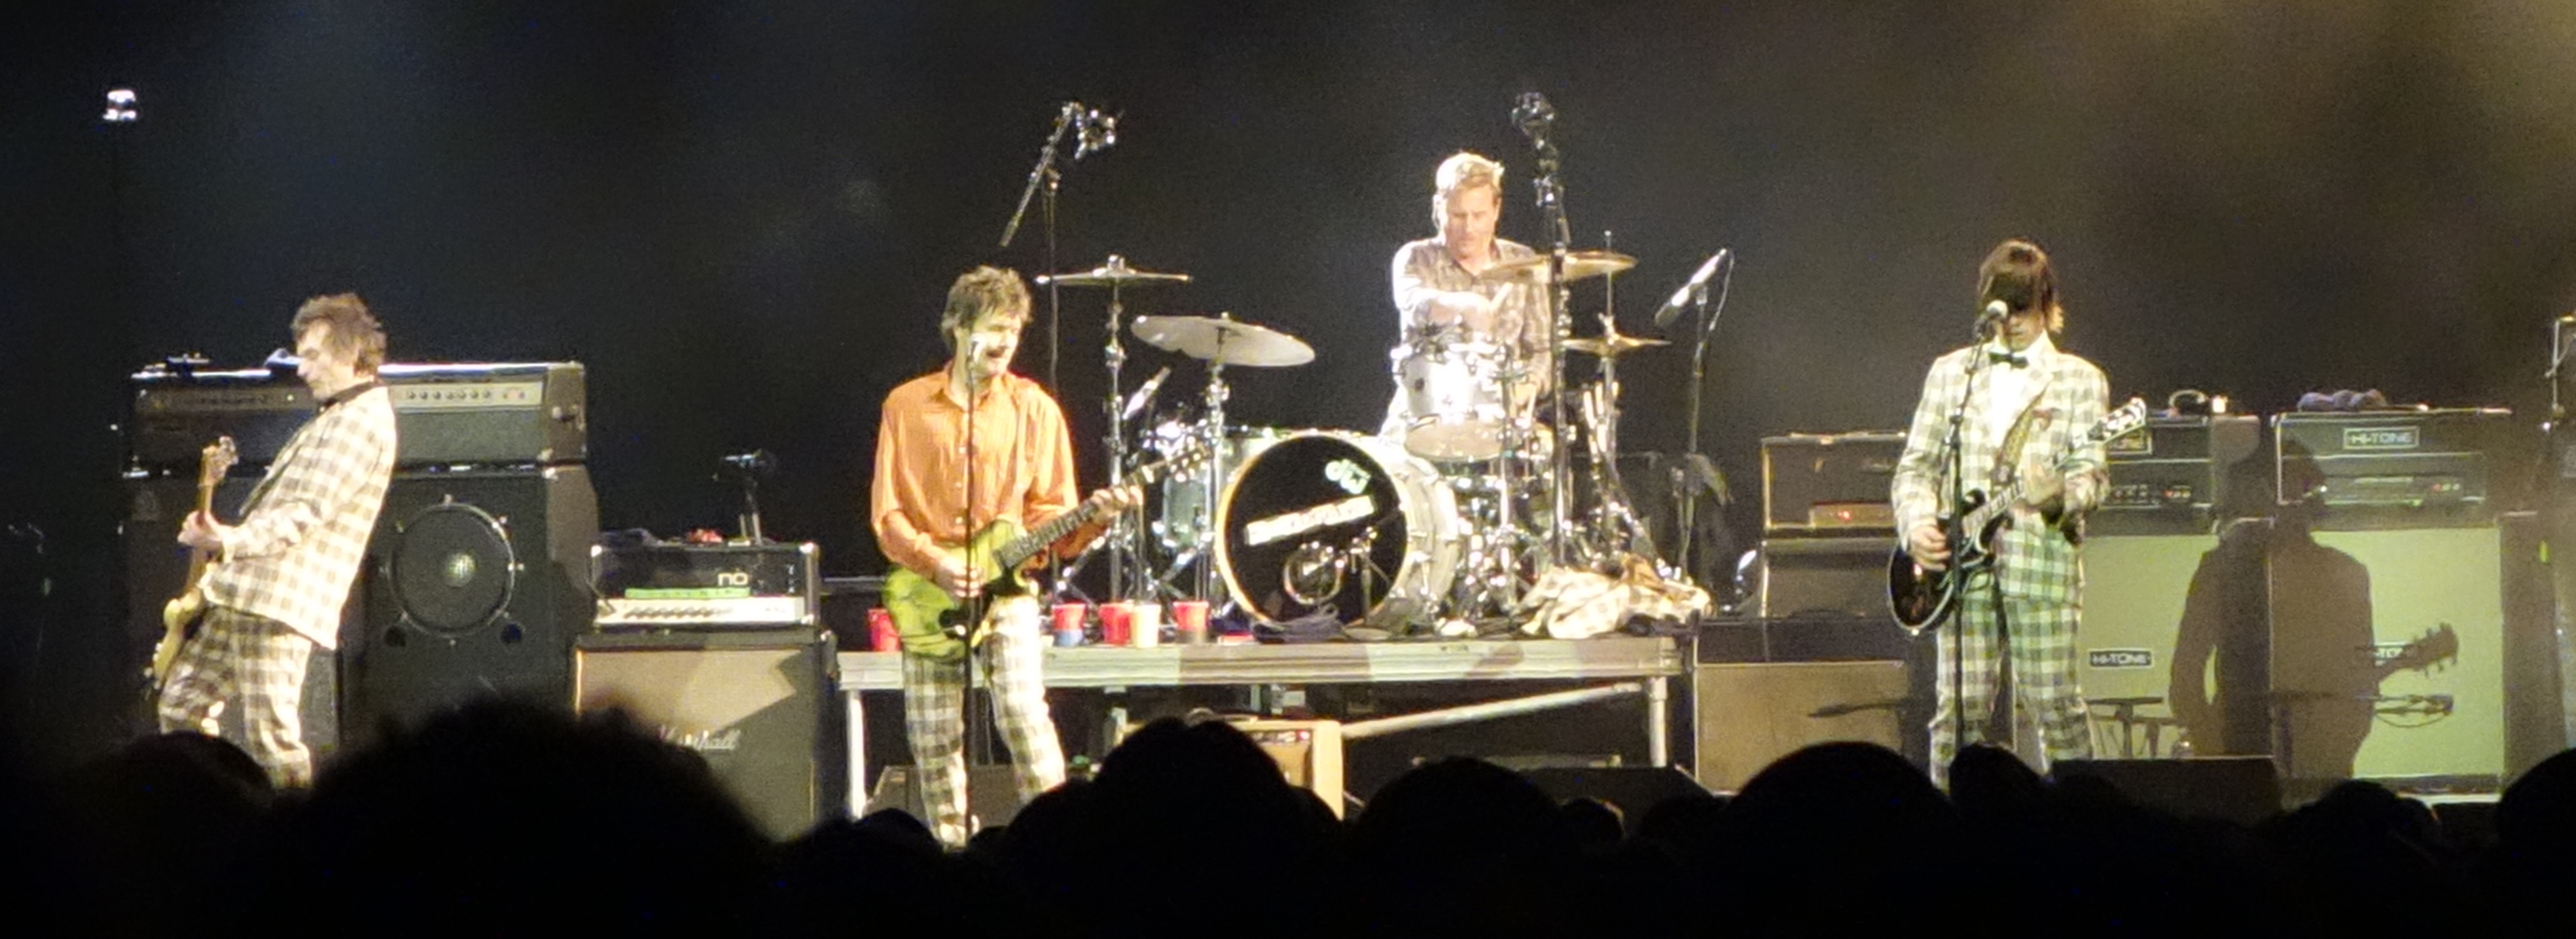 The-Replacements-Midway-Stadium-St-Paul-2014-5